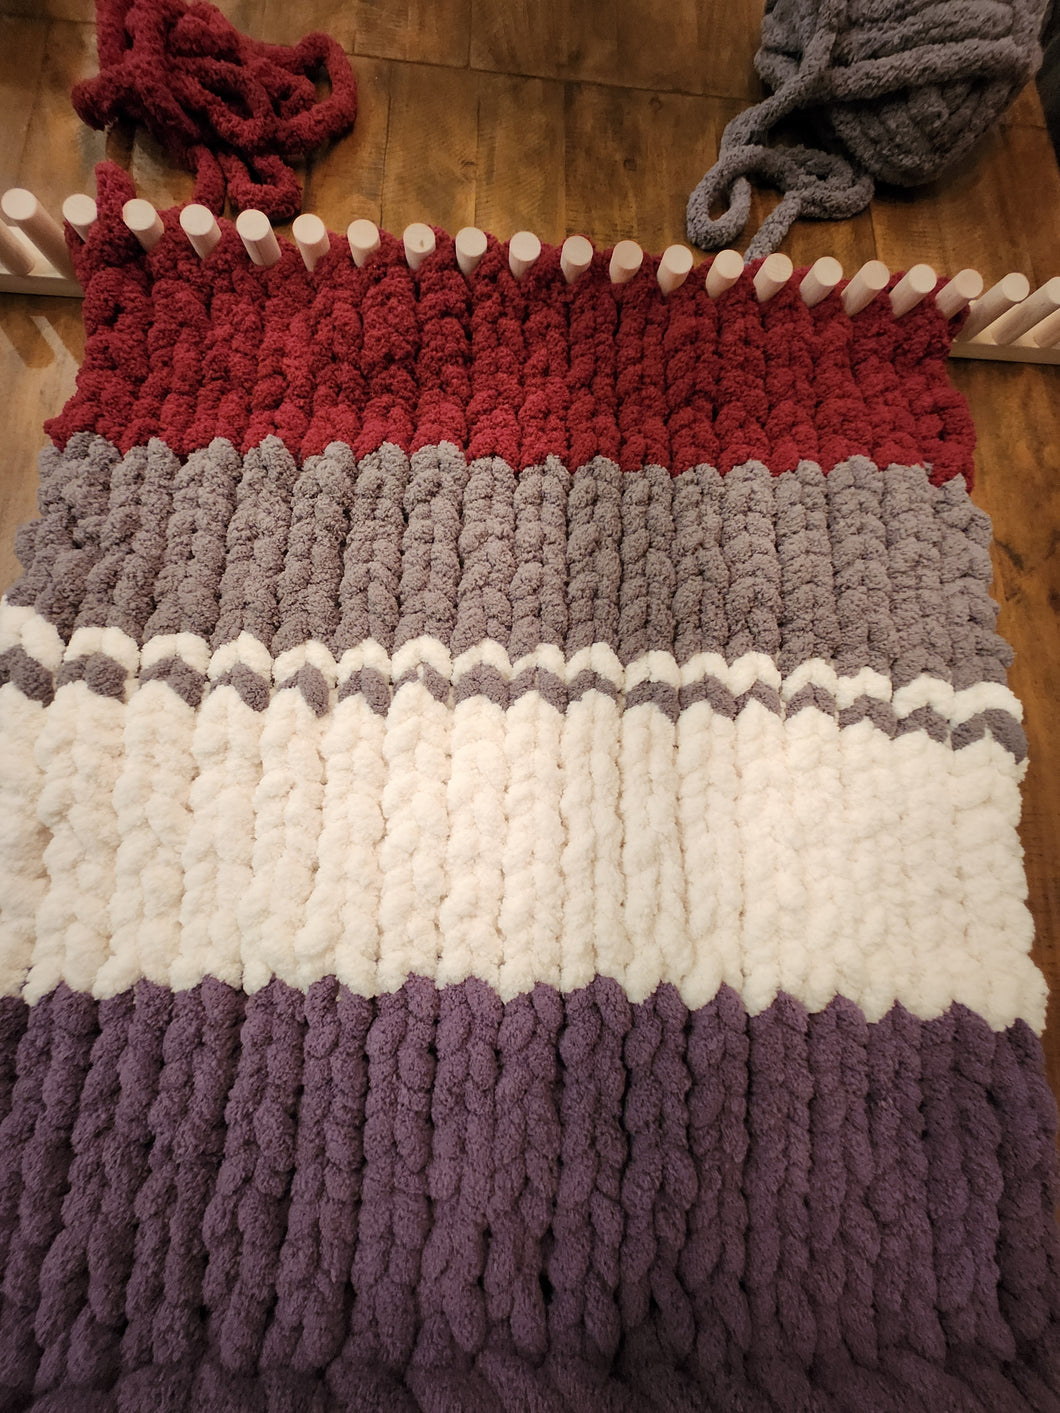 Chunky Blanket Loom - Standard Size - NO EXPERIENCE - Online Video Tutorials